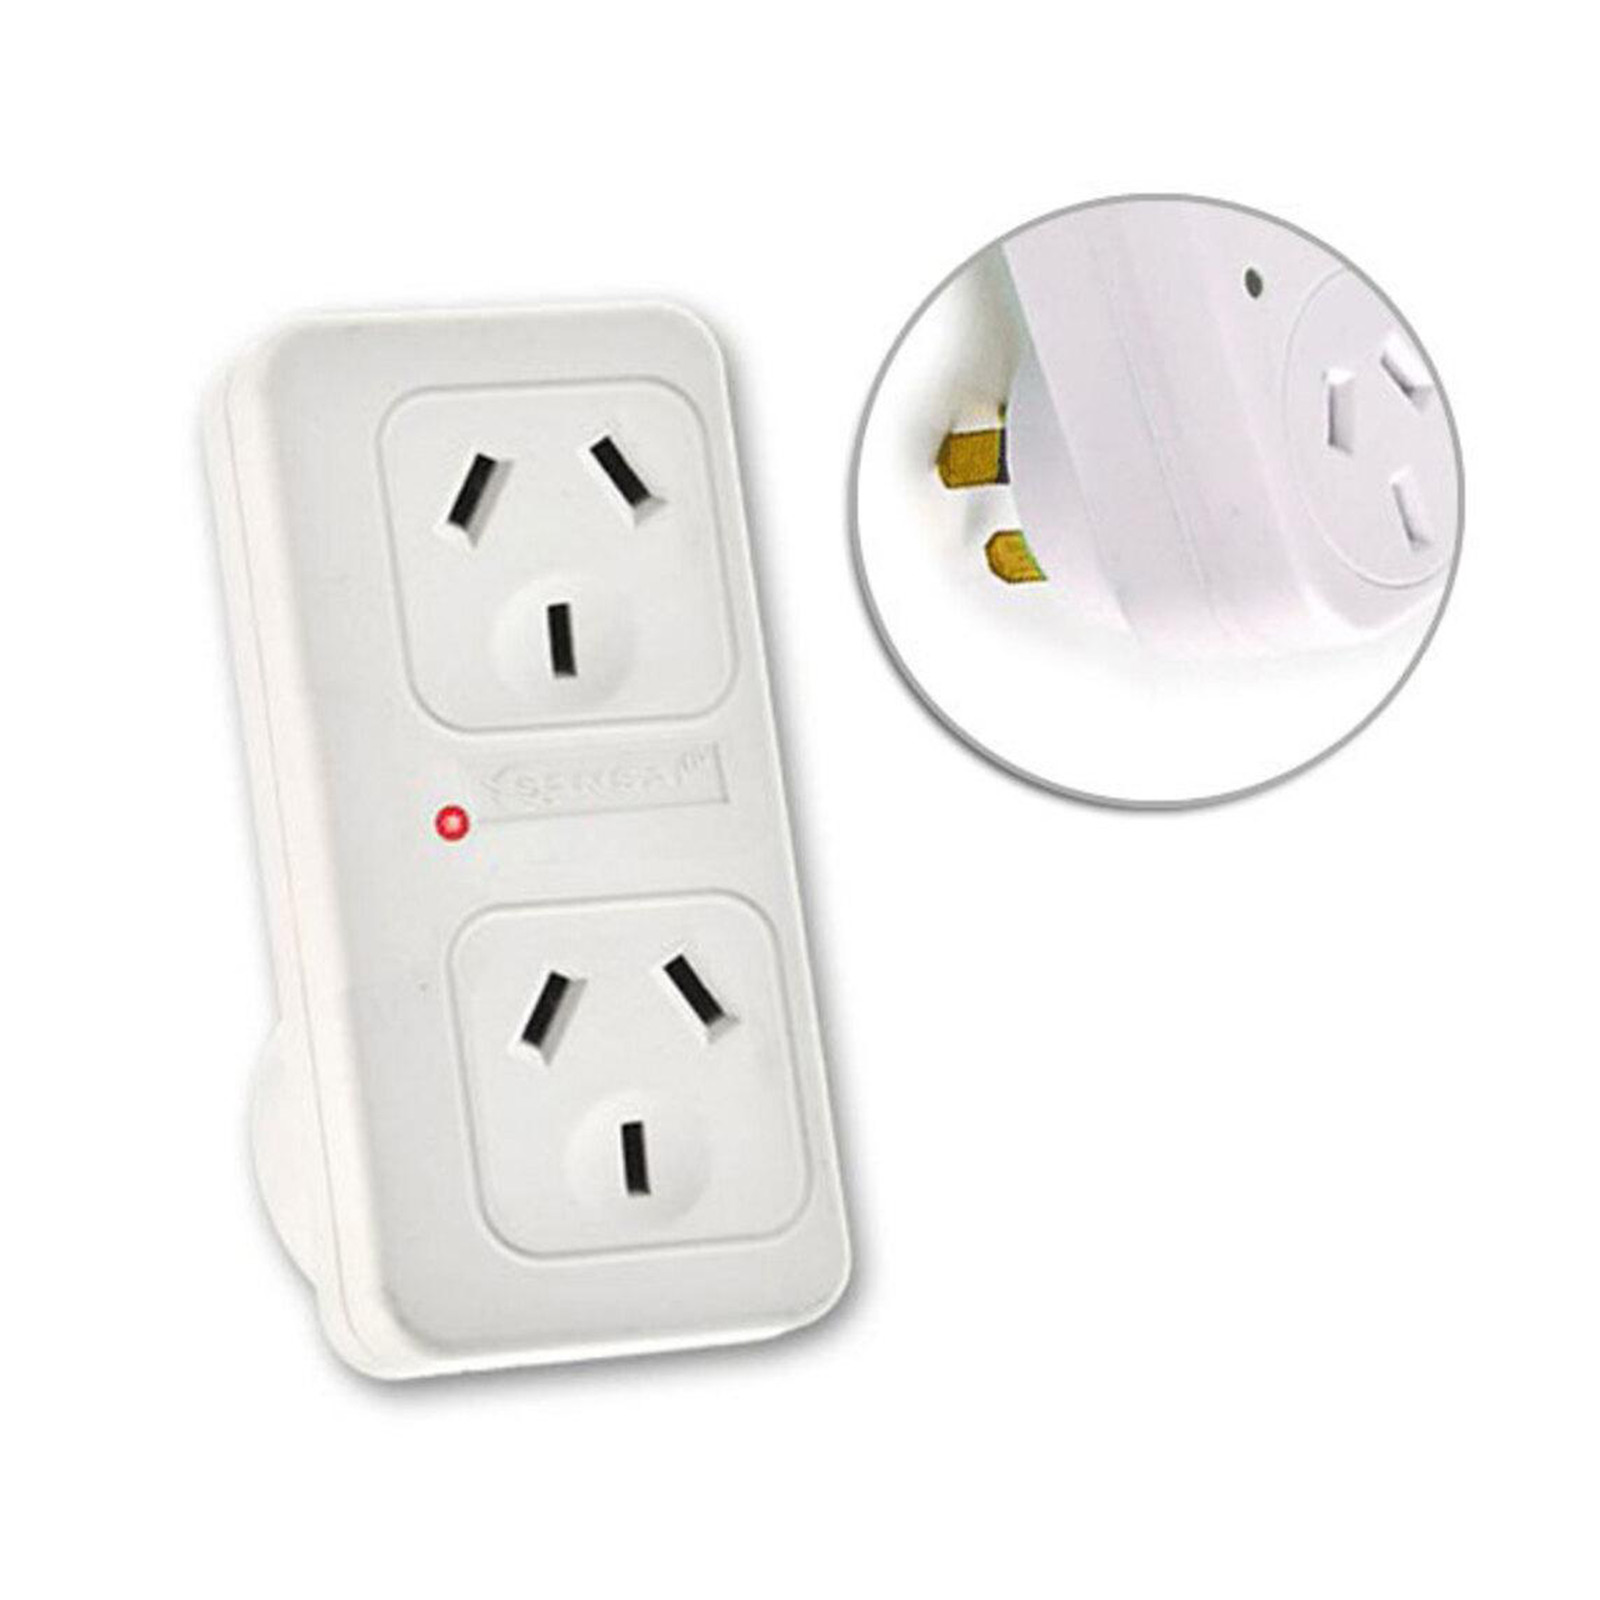 Powerpoint Surge Protector Adaptor Double – Vertical